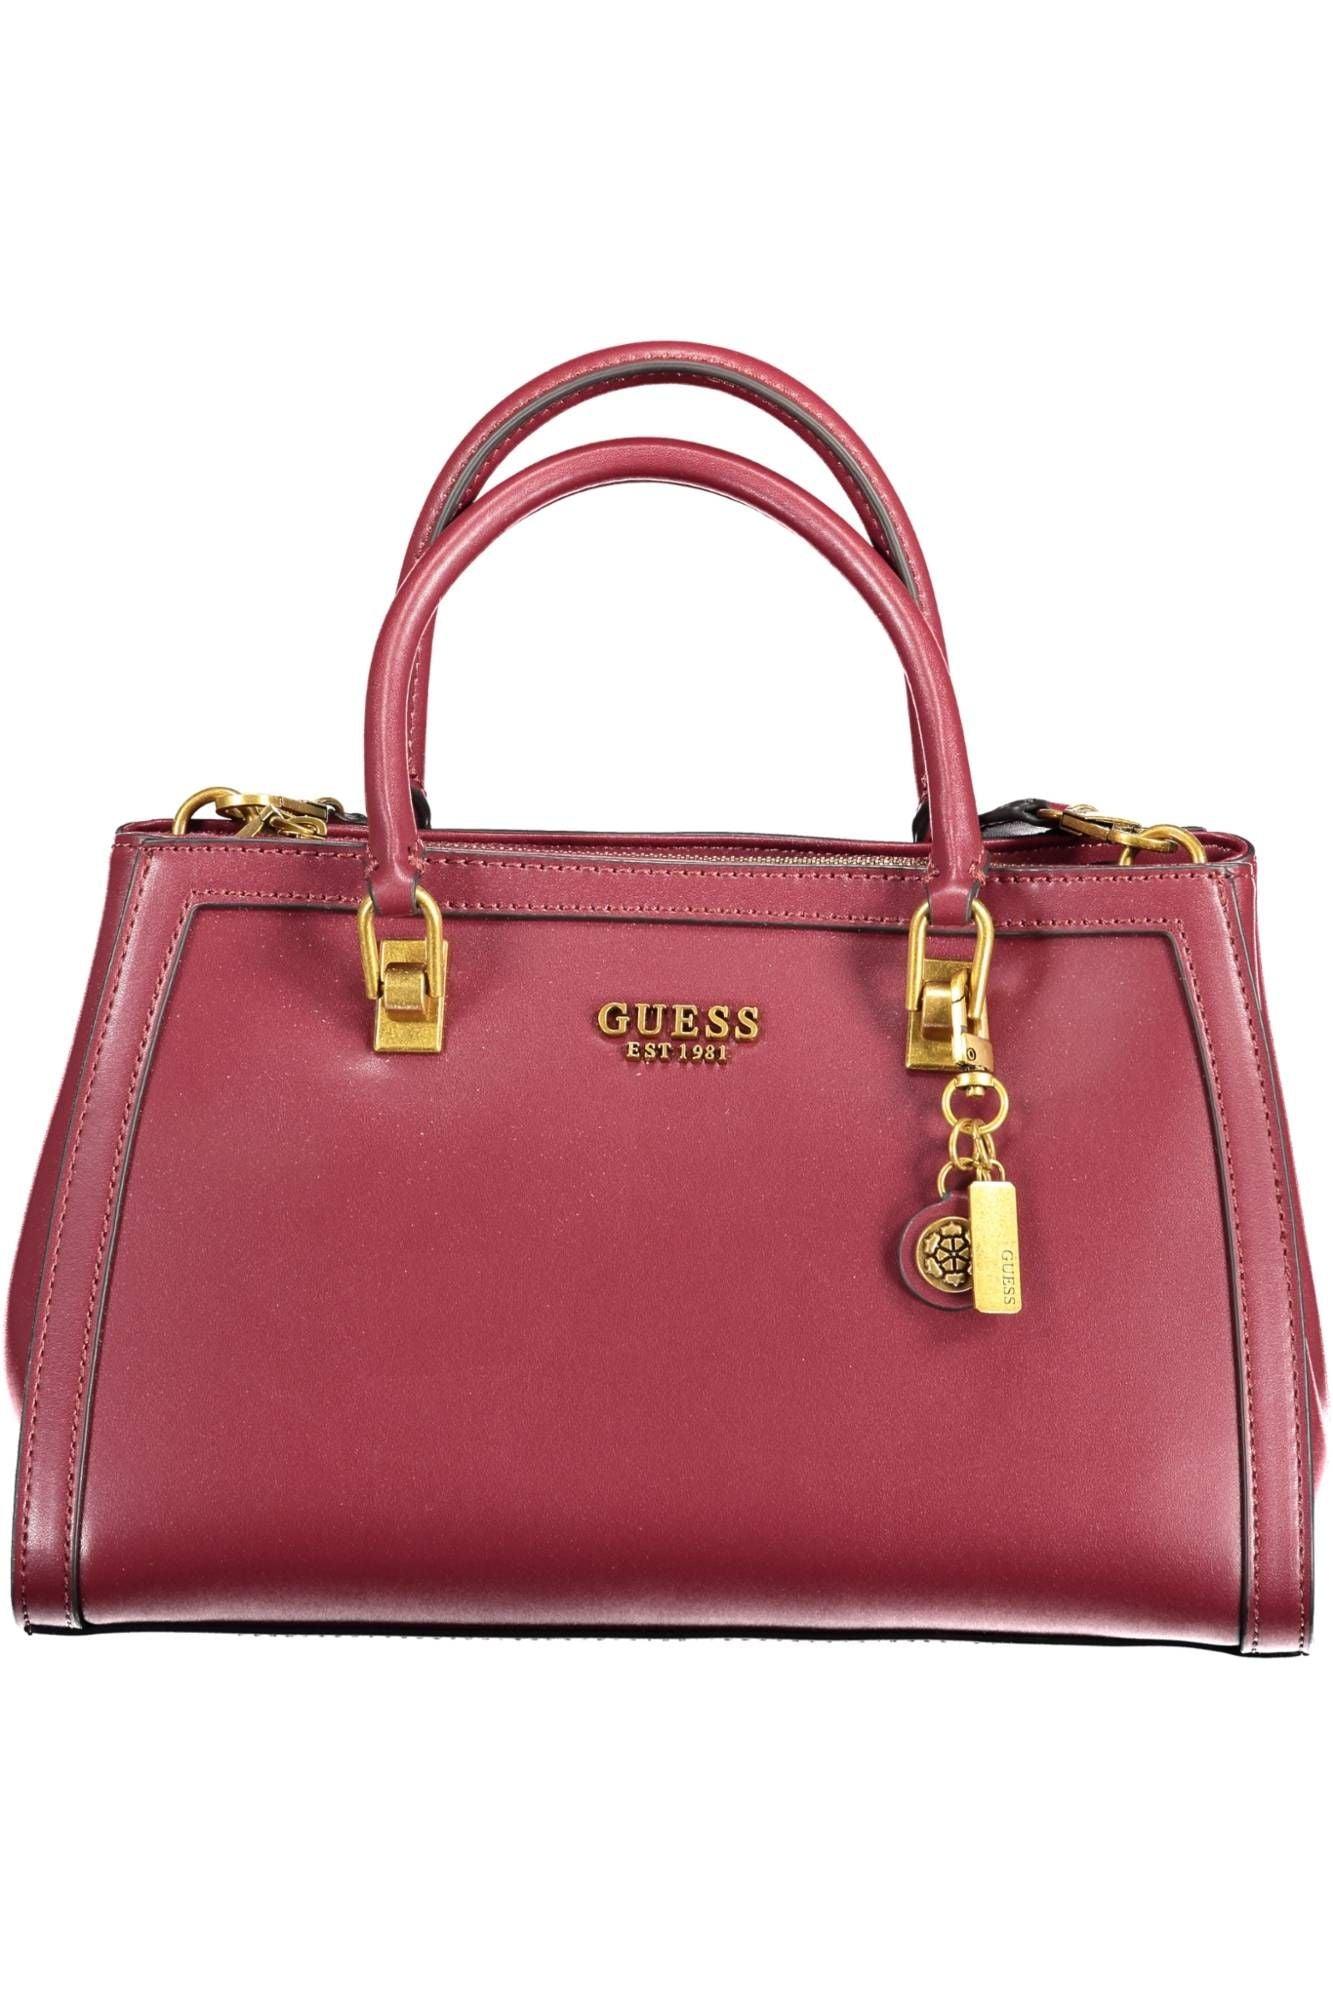 Guess Purple Leather Handbag in Red